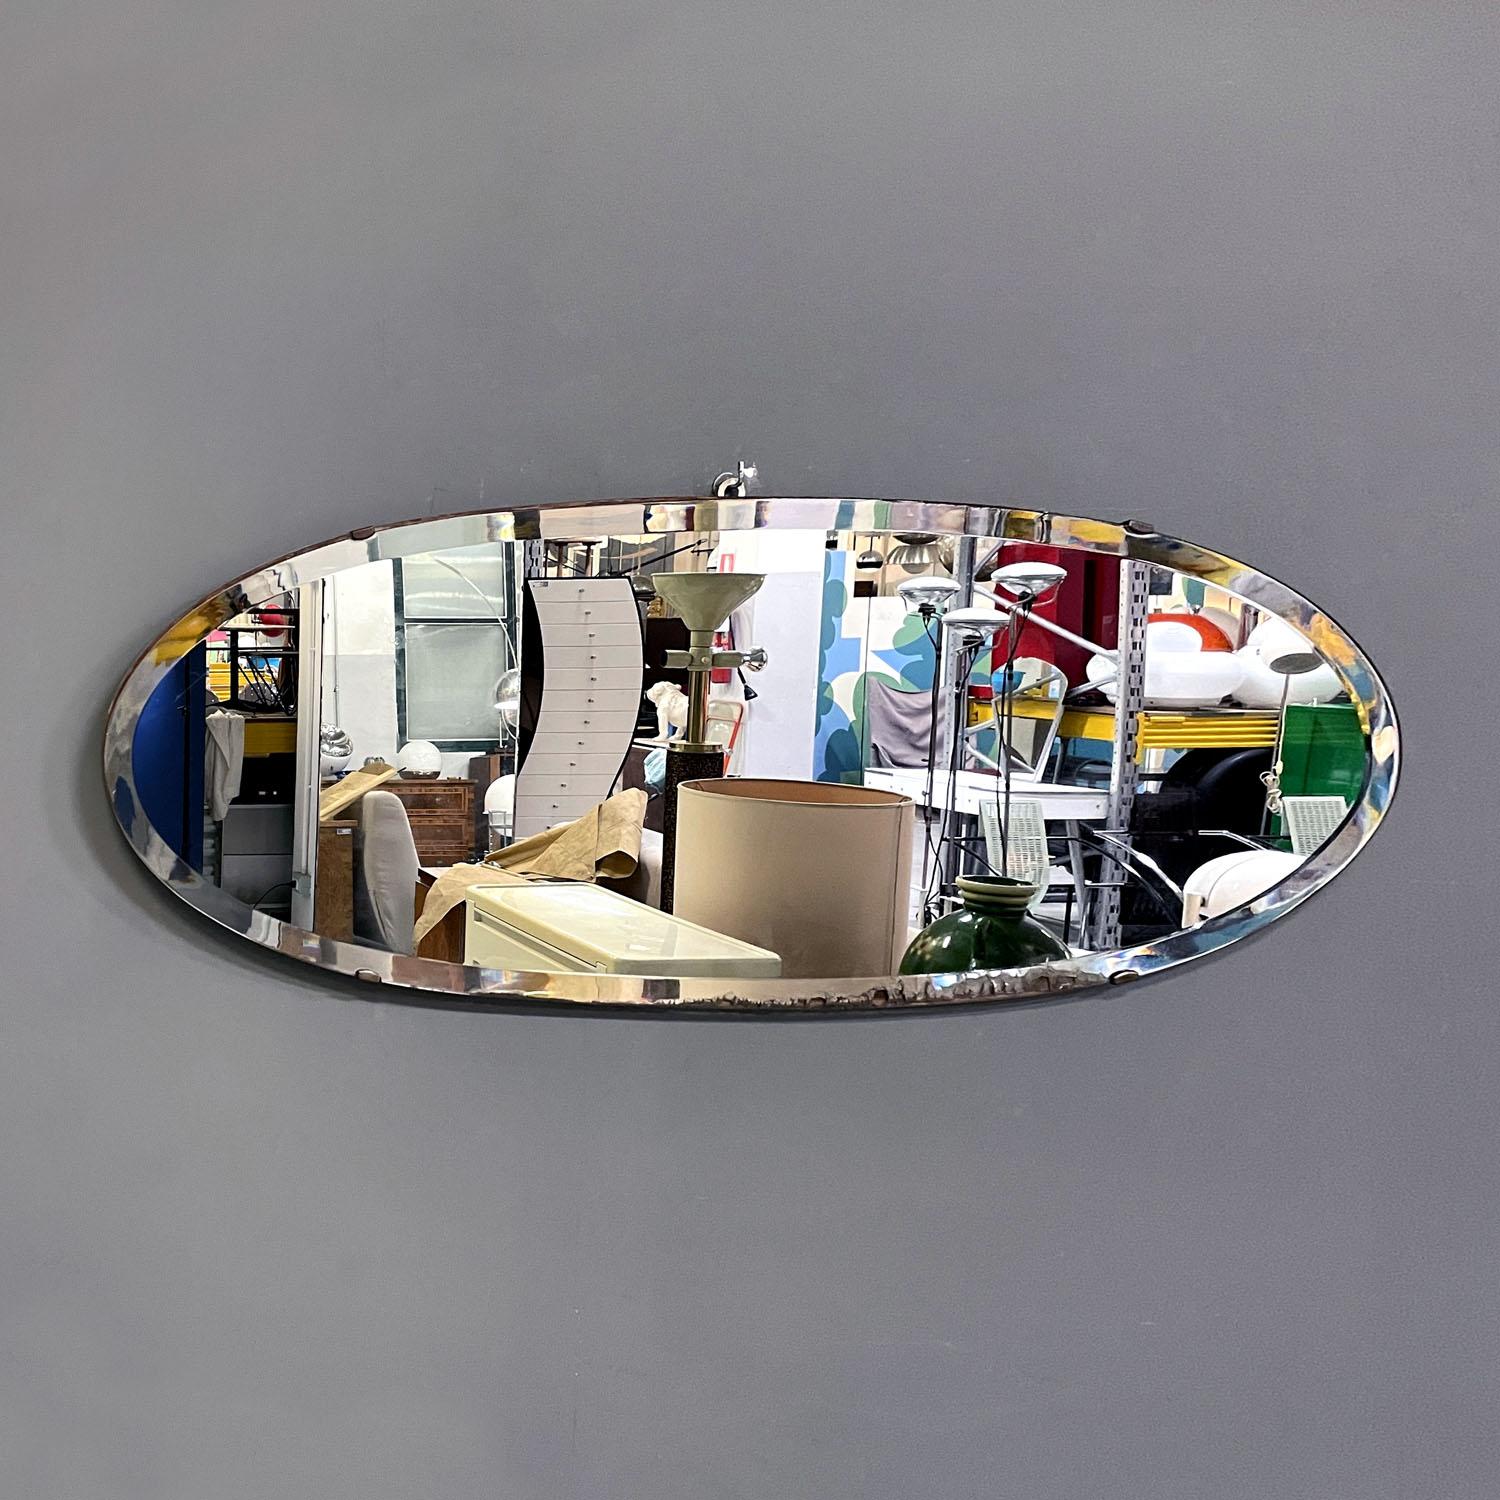 Italian mid-century modern oval wall mirror, 1950s
Oval shaped wall mirror. It has a decorative slant along the entire circumference. The support base is made of wood and supports and secures the mirror using small brass hooks.
1950s.
Good